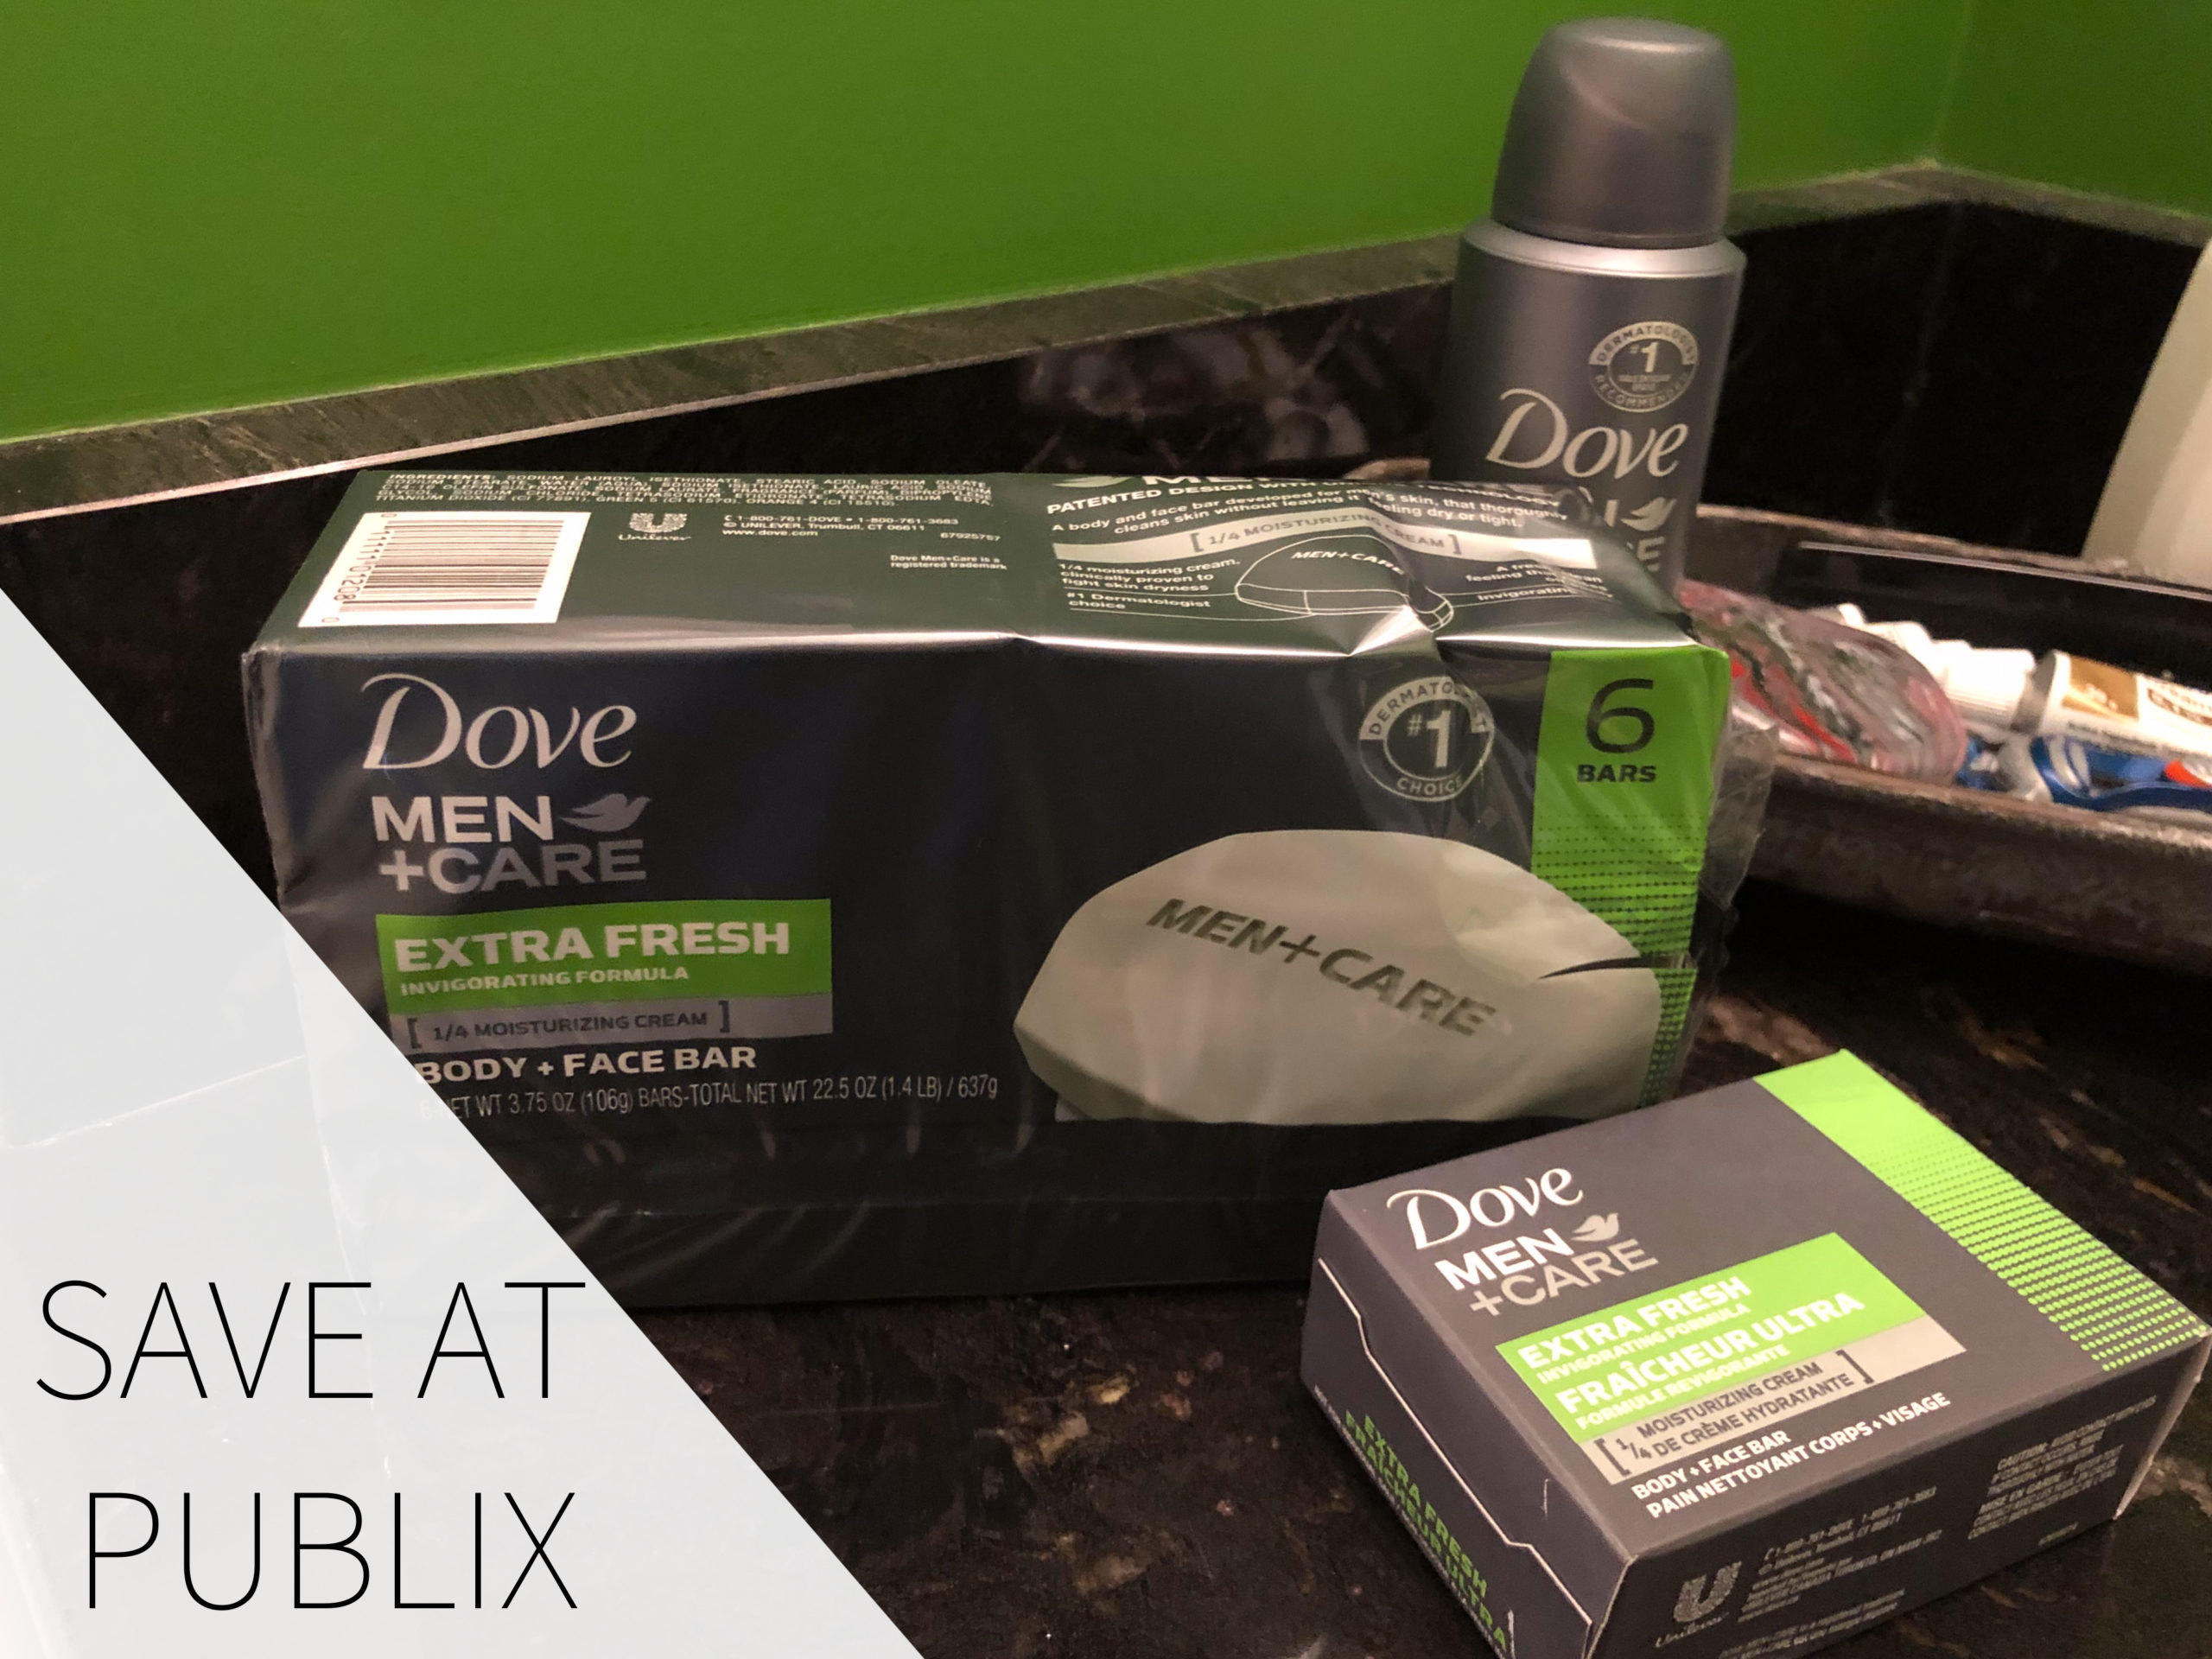 Restock Your Family's Personal Care Products And Get Great Savings At Publix on I Heart Publix